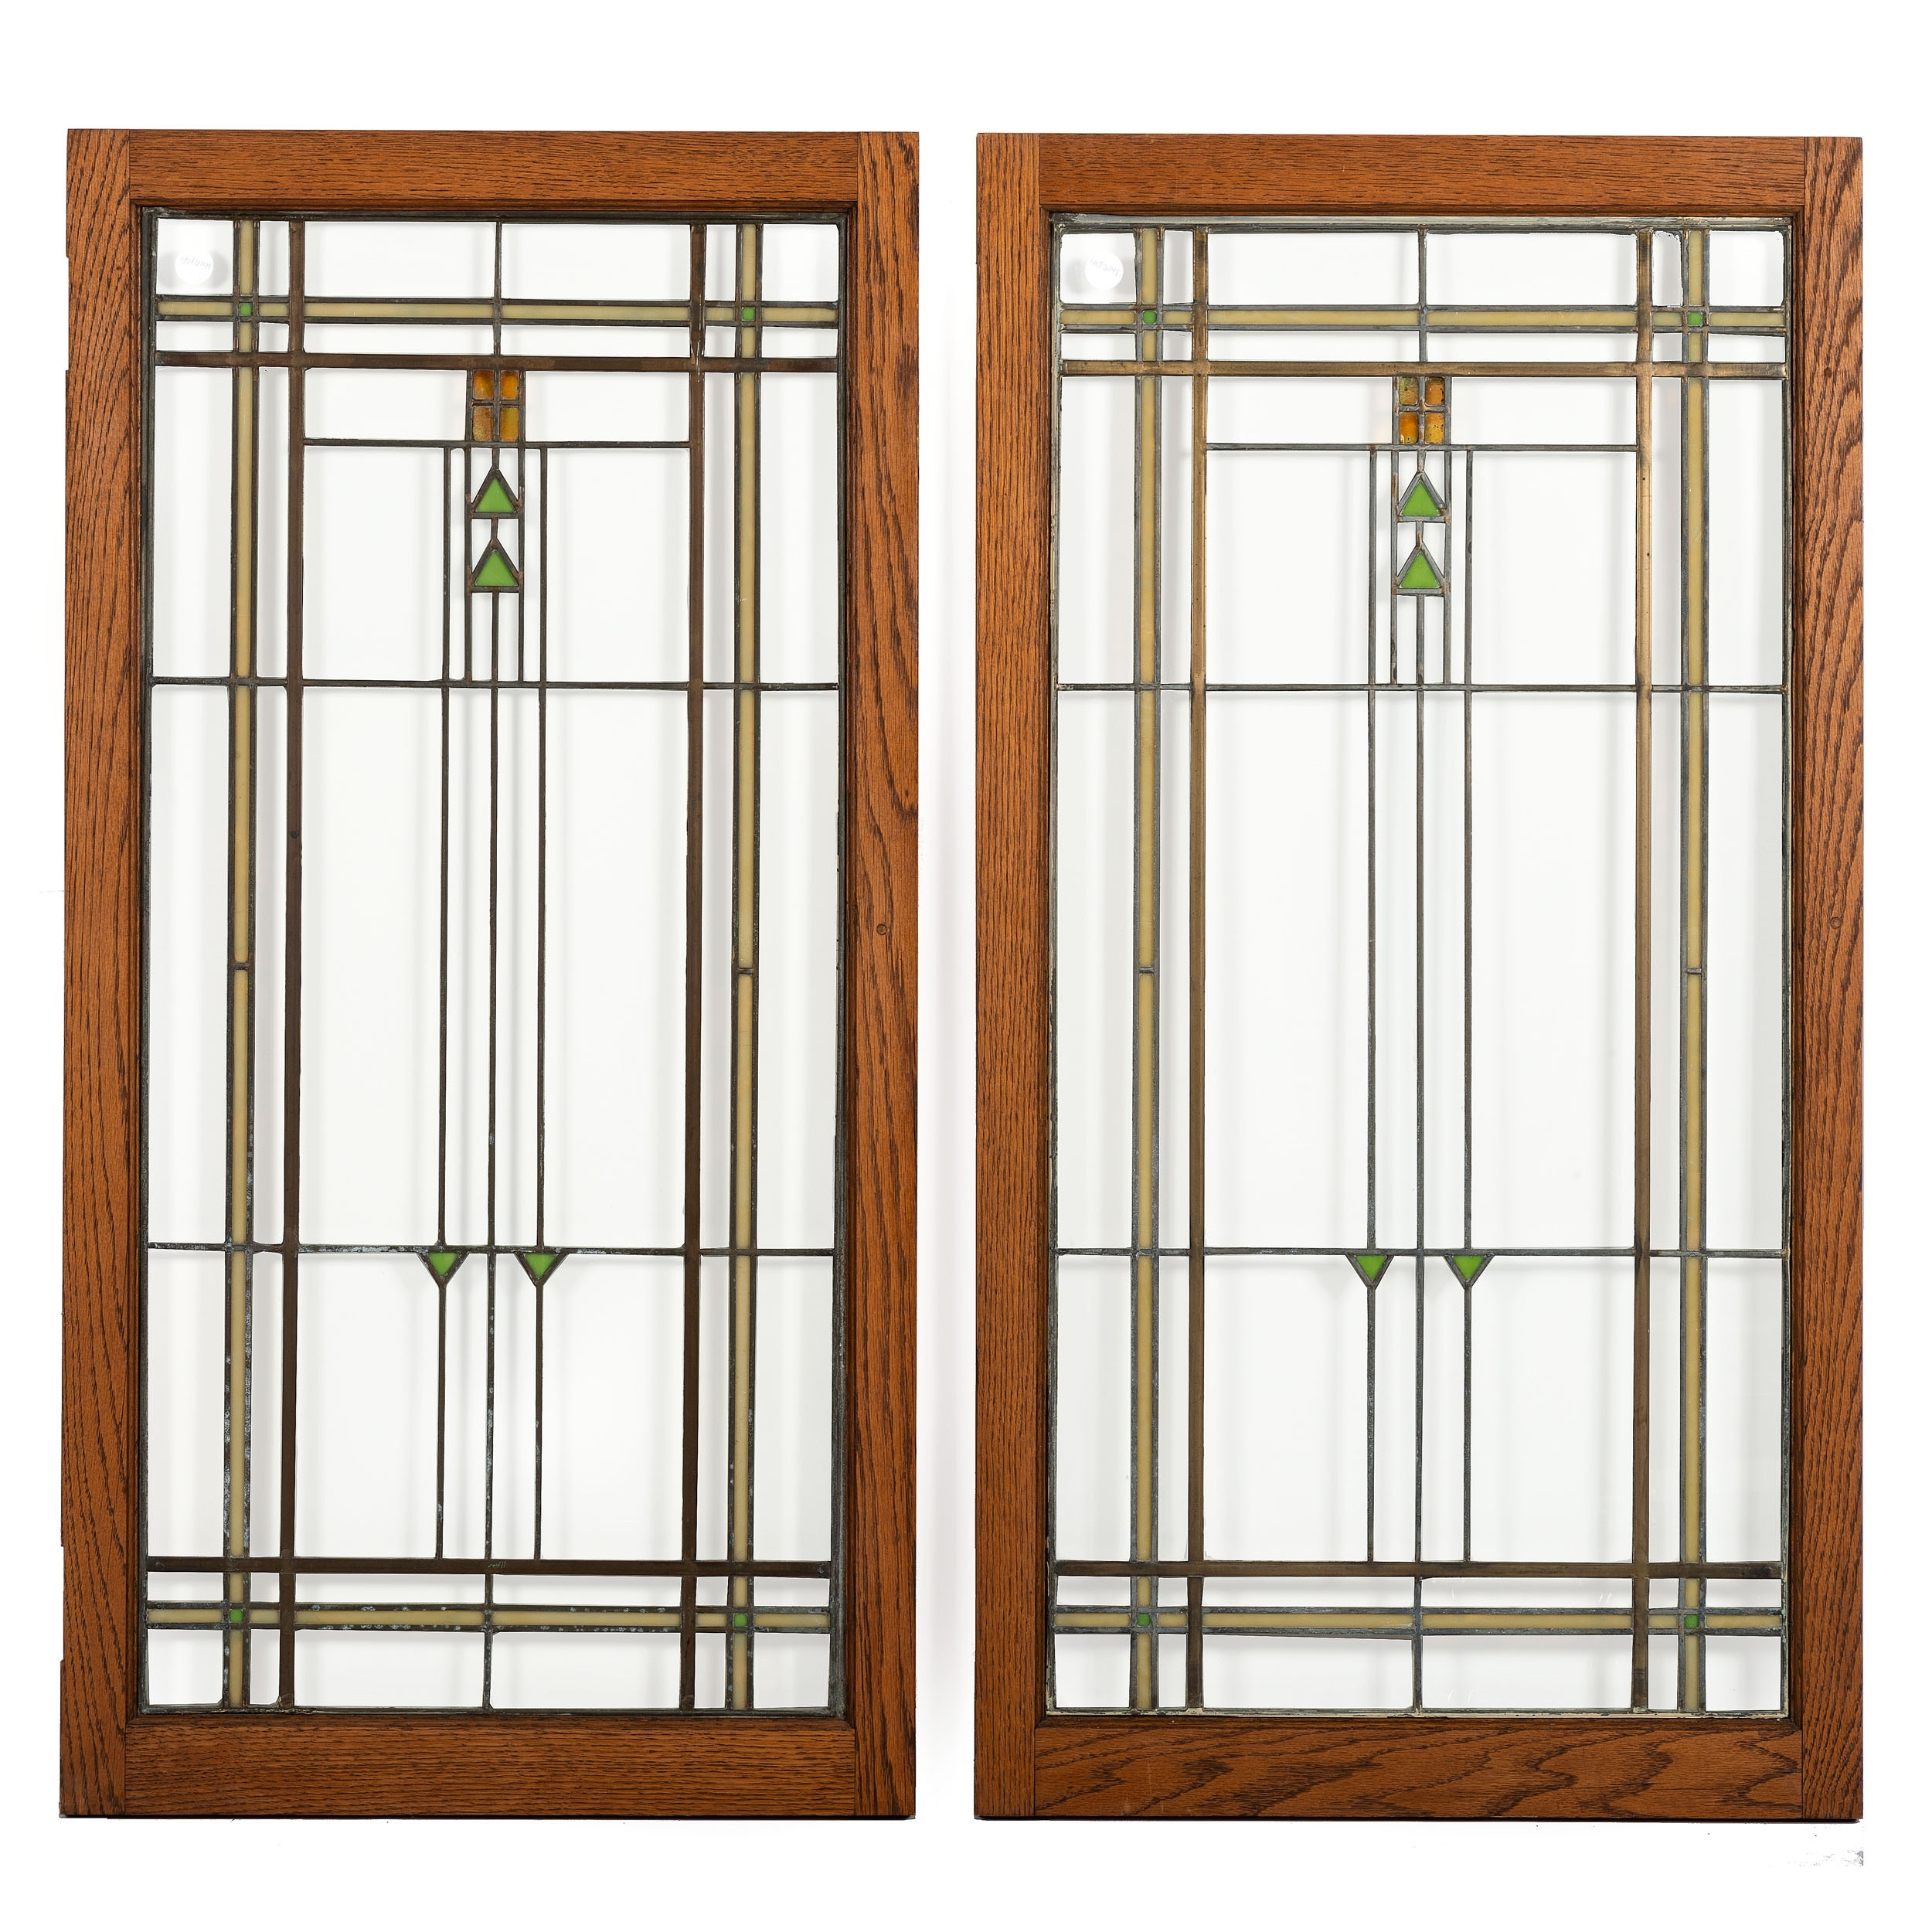 Attributed to Frank Lloyd Wright, Pair of Arts and Crafts Leaded Glass Casement Windows by Frank Lloyd Wright, Circa 1915-1916